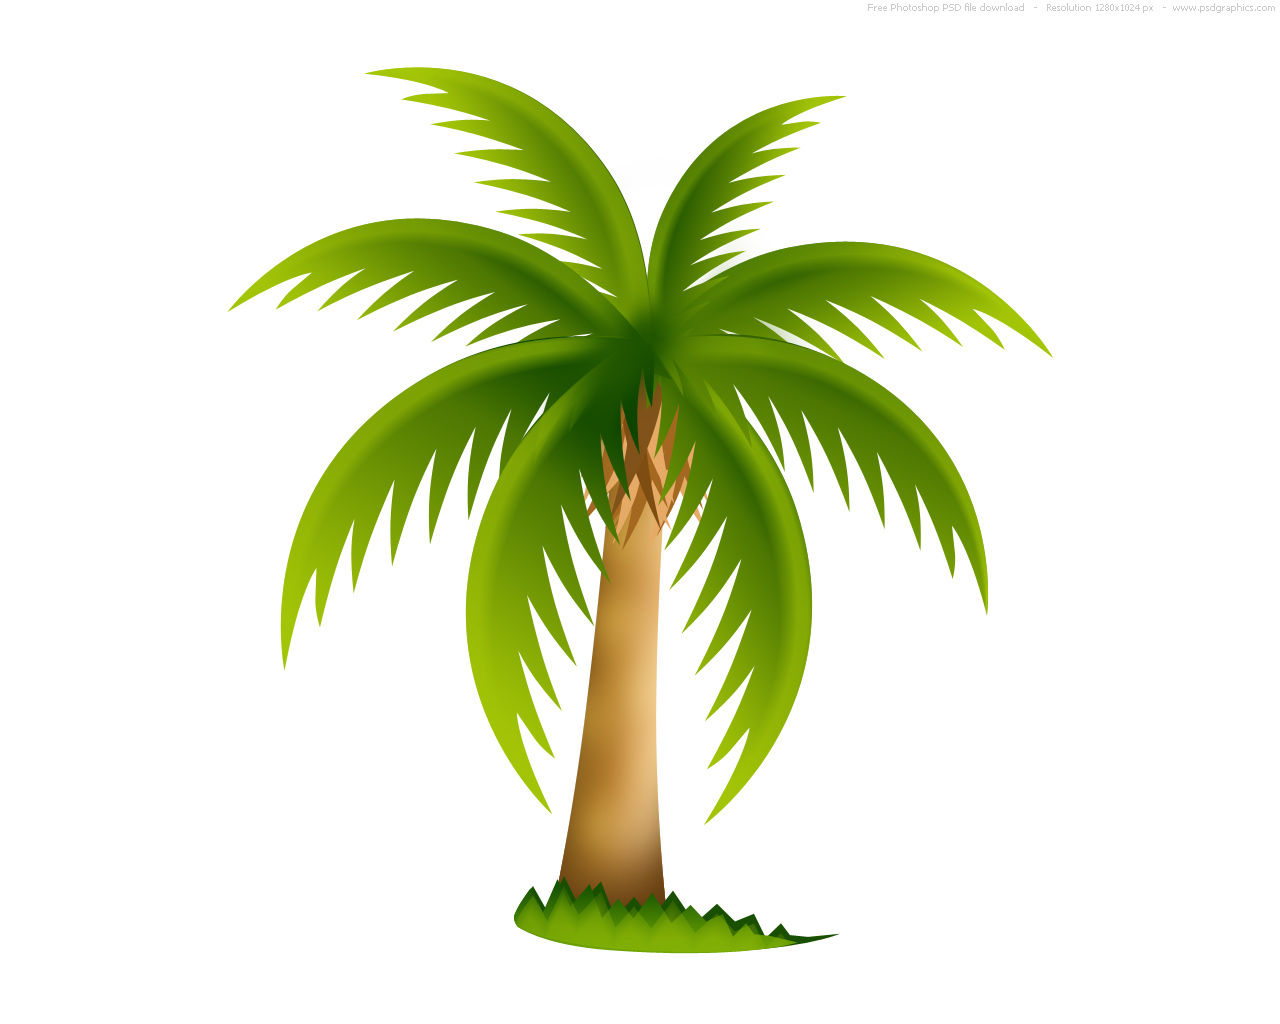 Clip art palm tree leaves clipart 2